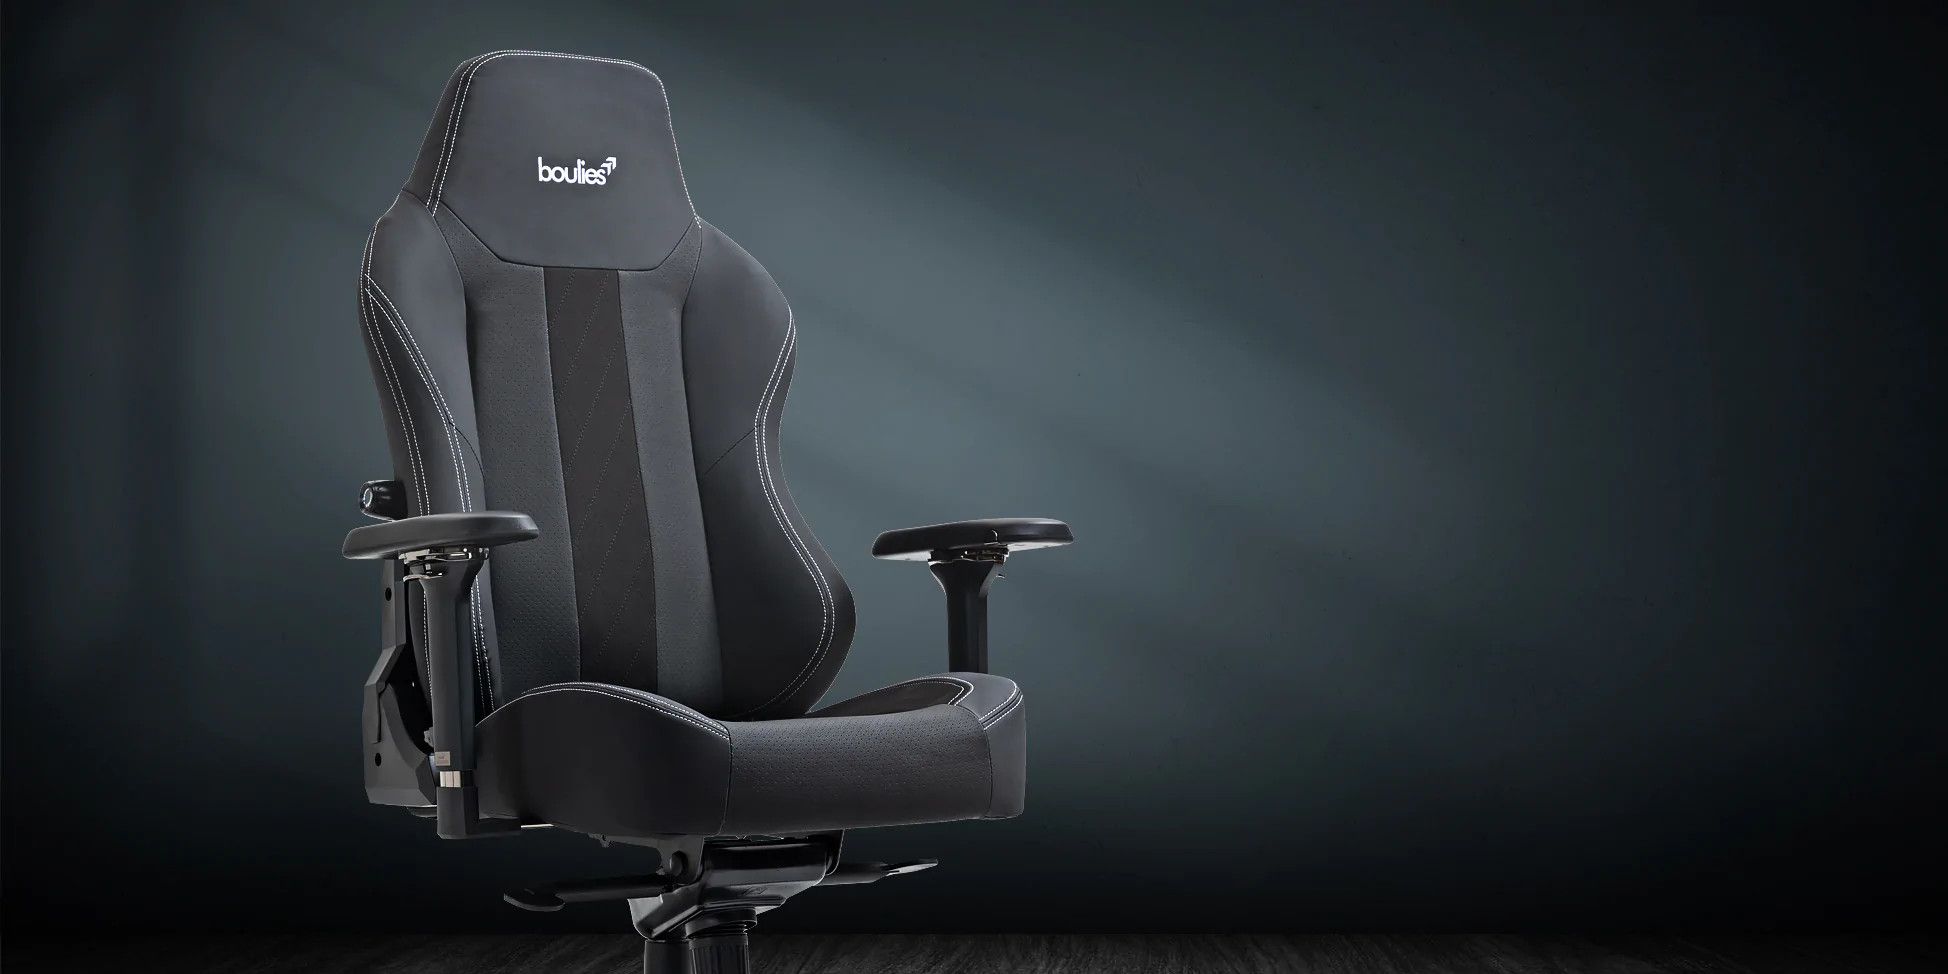 An image of a Boulie's Master Chair at an angle against a black and grey background